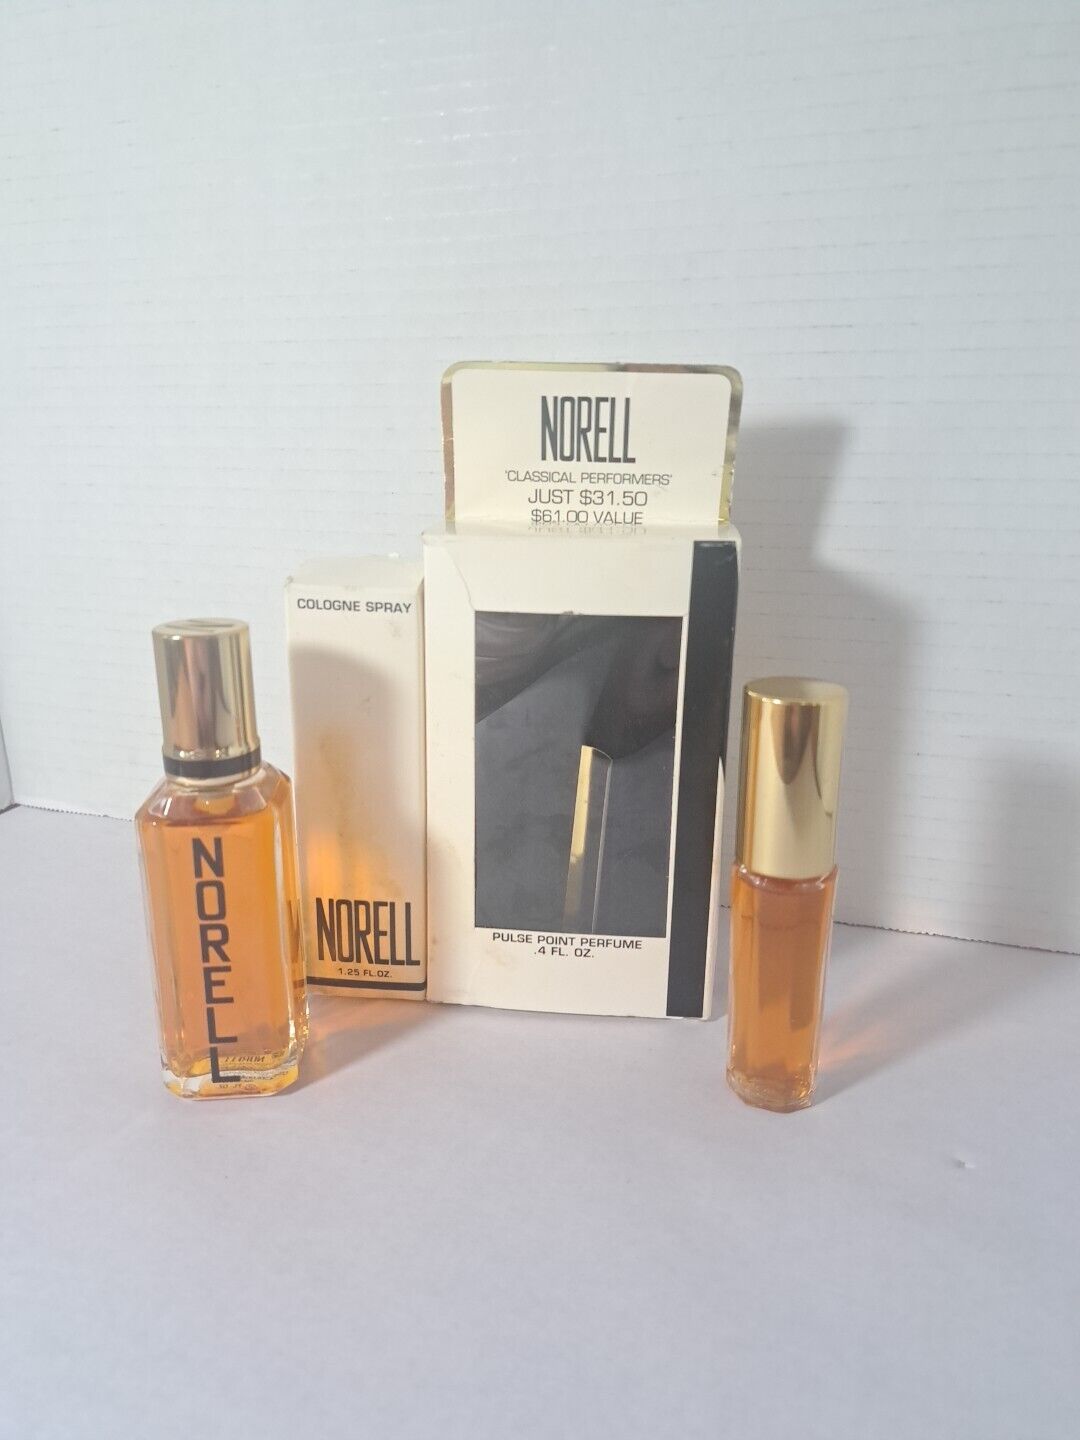 Norell Classical Performers Cologne Spray 1.2 FL Oz Pulse Point Perfume .4 FL Oz